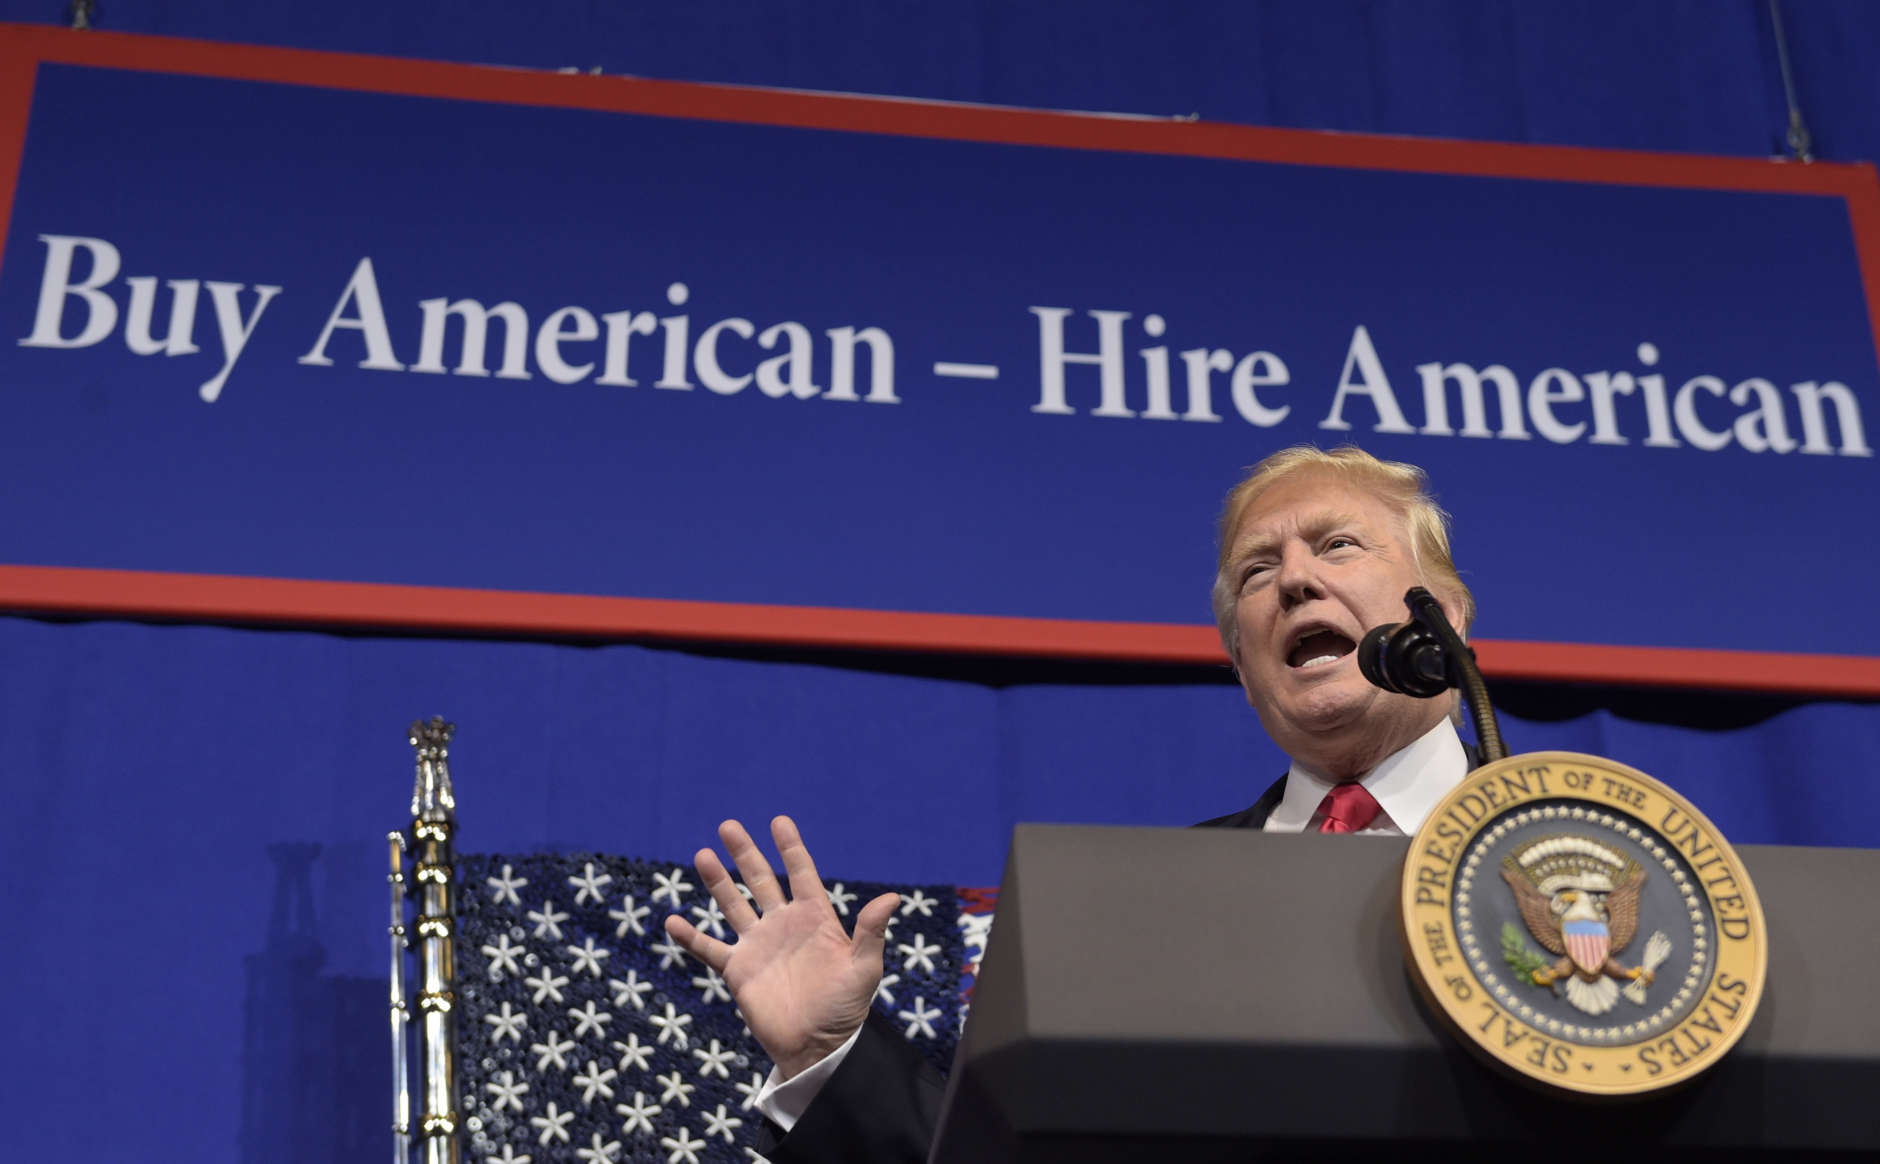 President Trump speaks April 18 at tool manufacturer Snap-on Inc. in Kenosha, Wisconsin. Trump had signed an executive order that day signaling a policy to aggressively promote and use American-made goods. (AP photo/Susan Walsh)